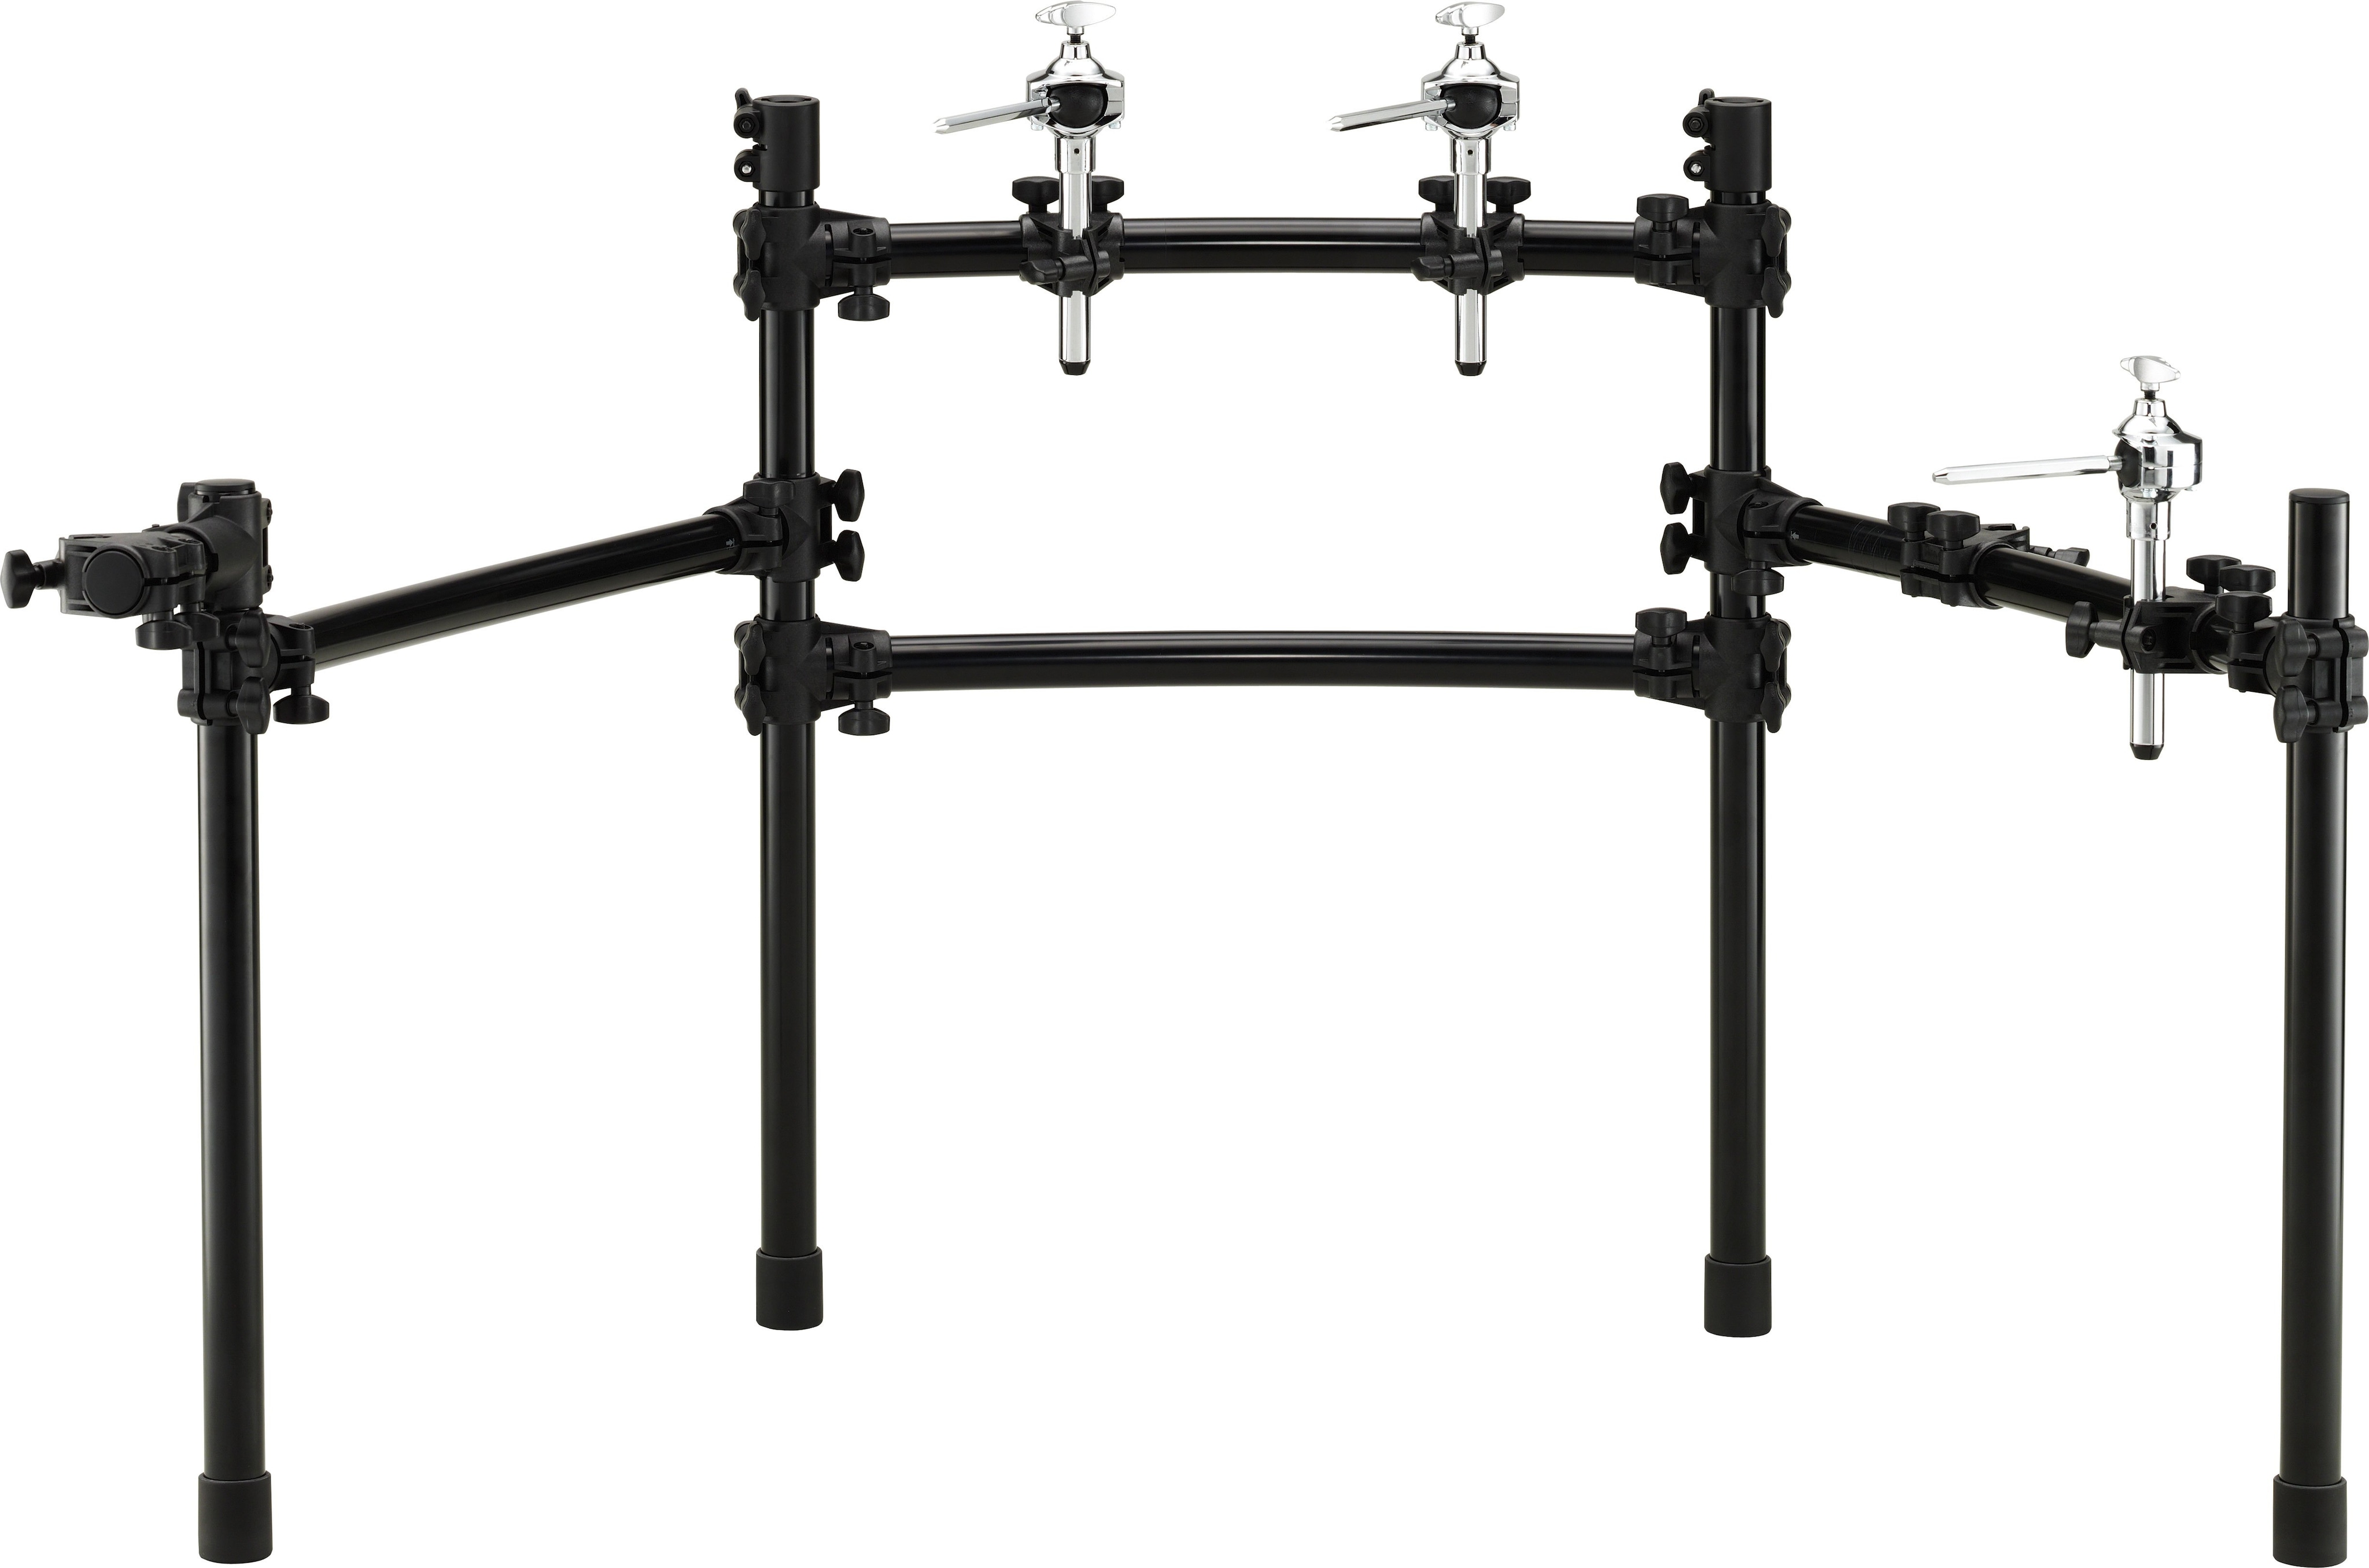 Yamaha RS70 rack clamp compatible with DTX 